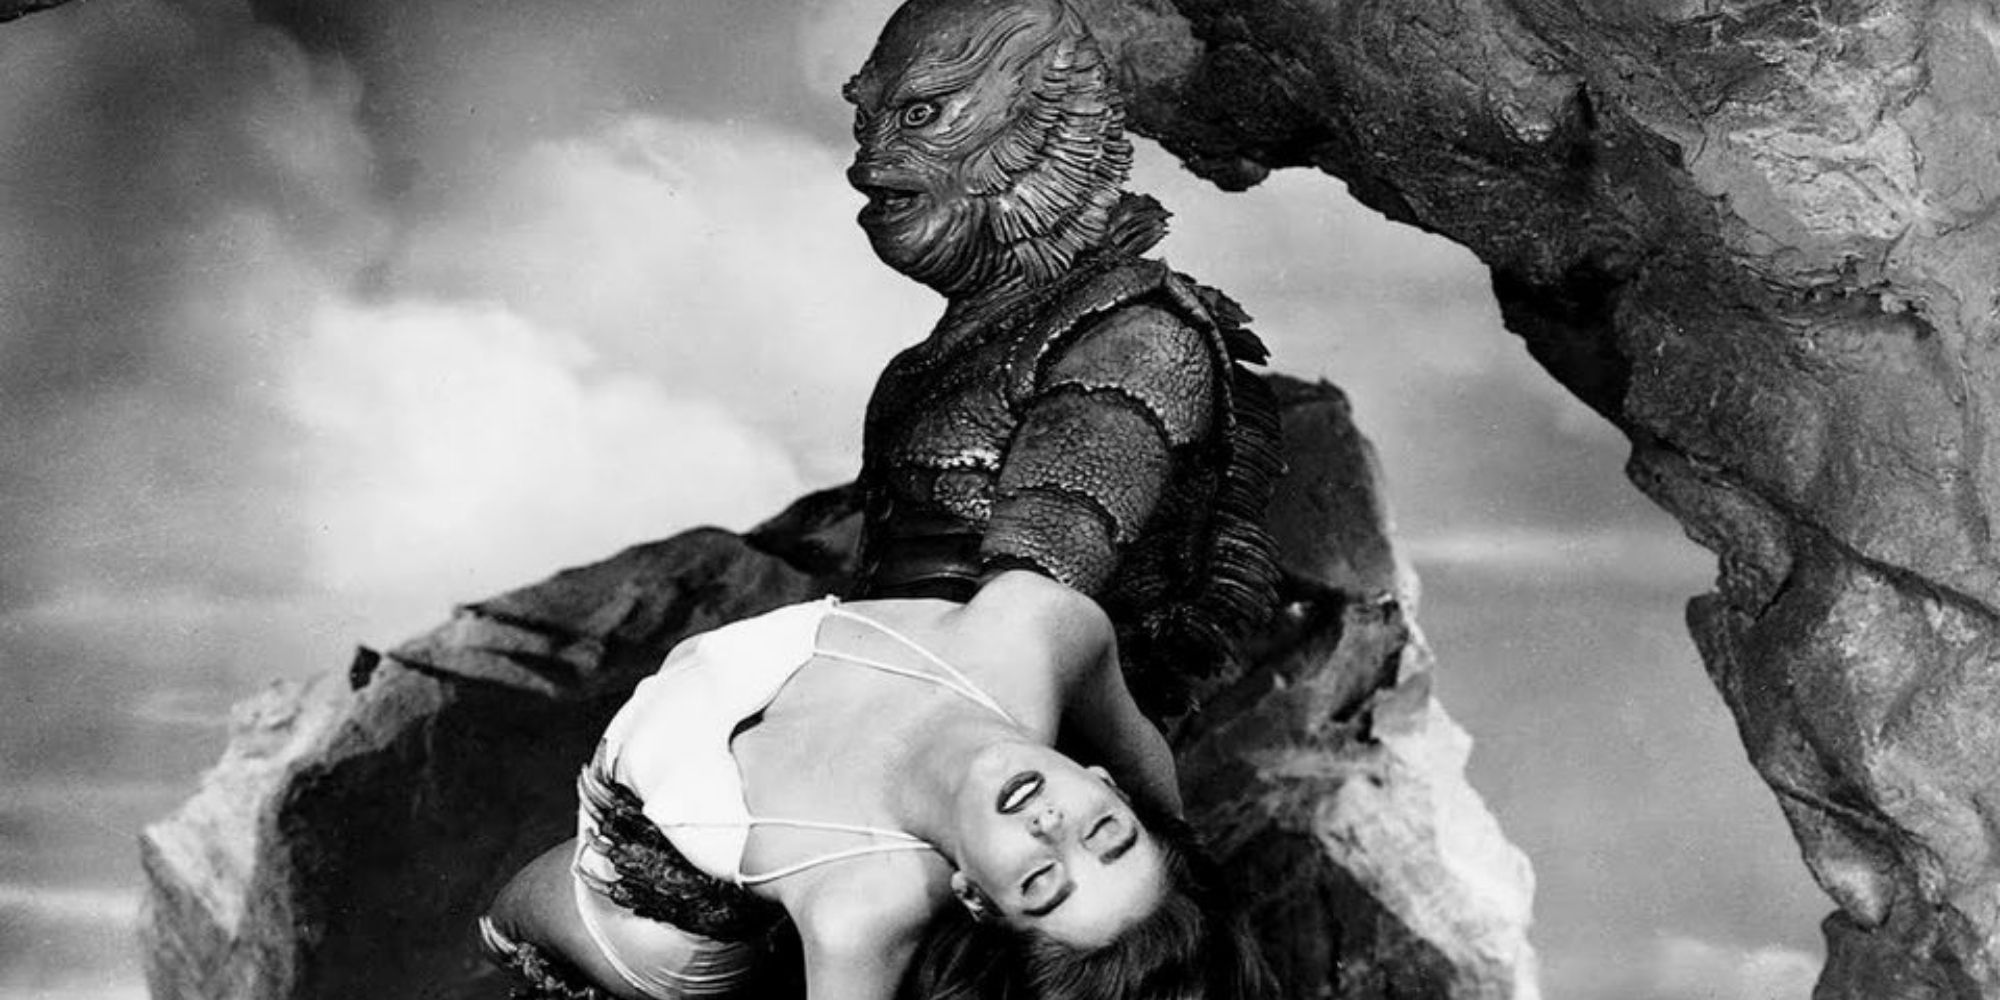 Sea monster carrying fainted woman in The Creature From the Black Lagoon